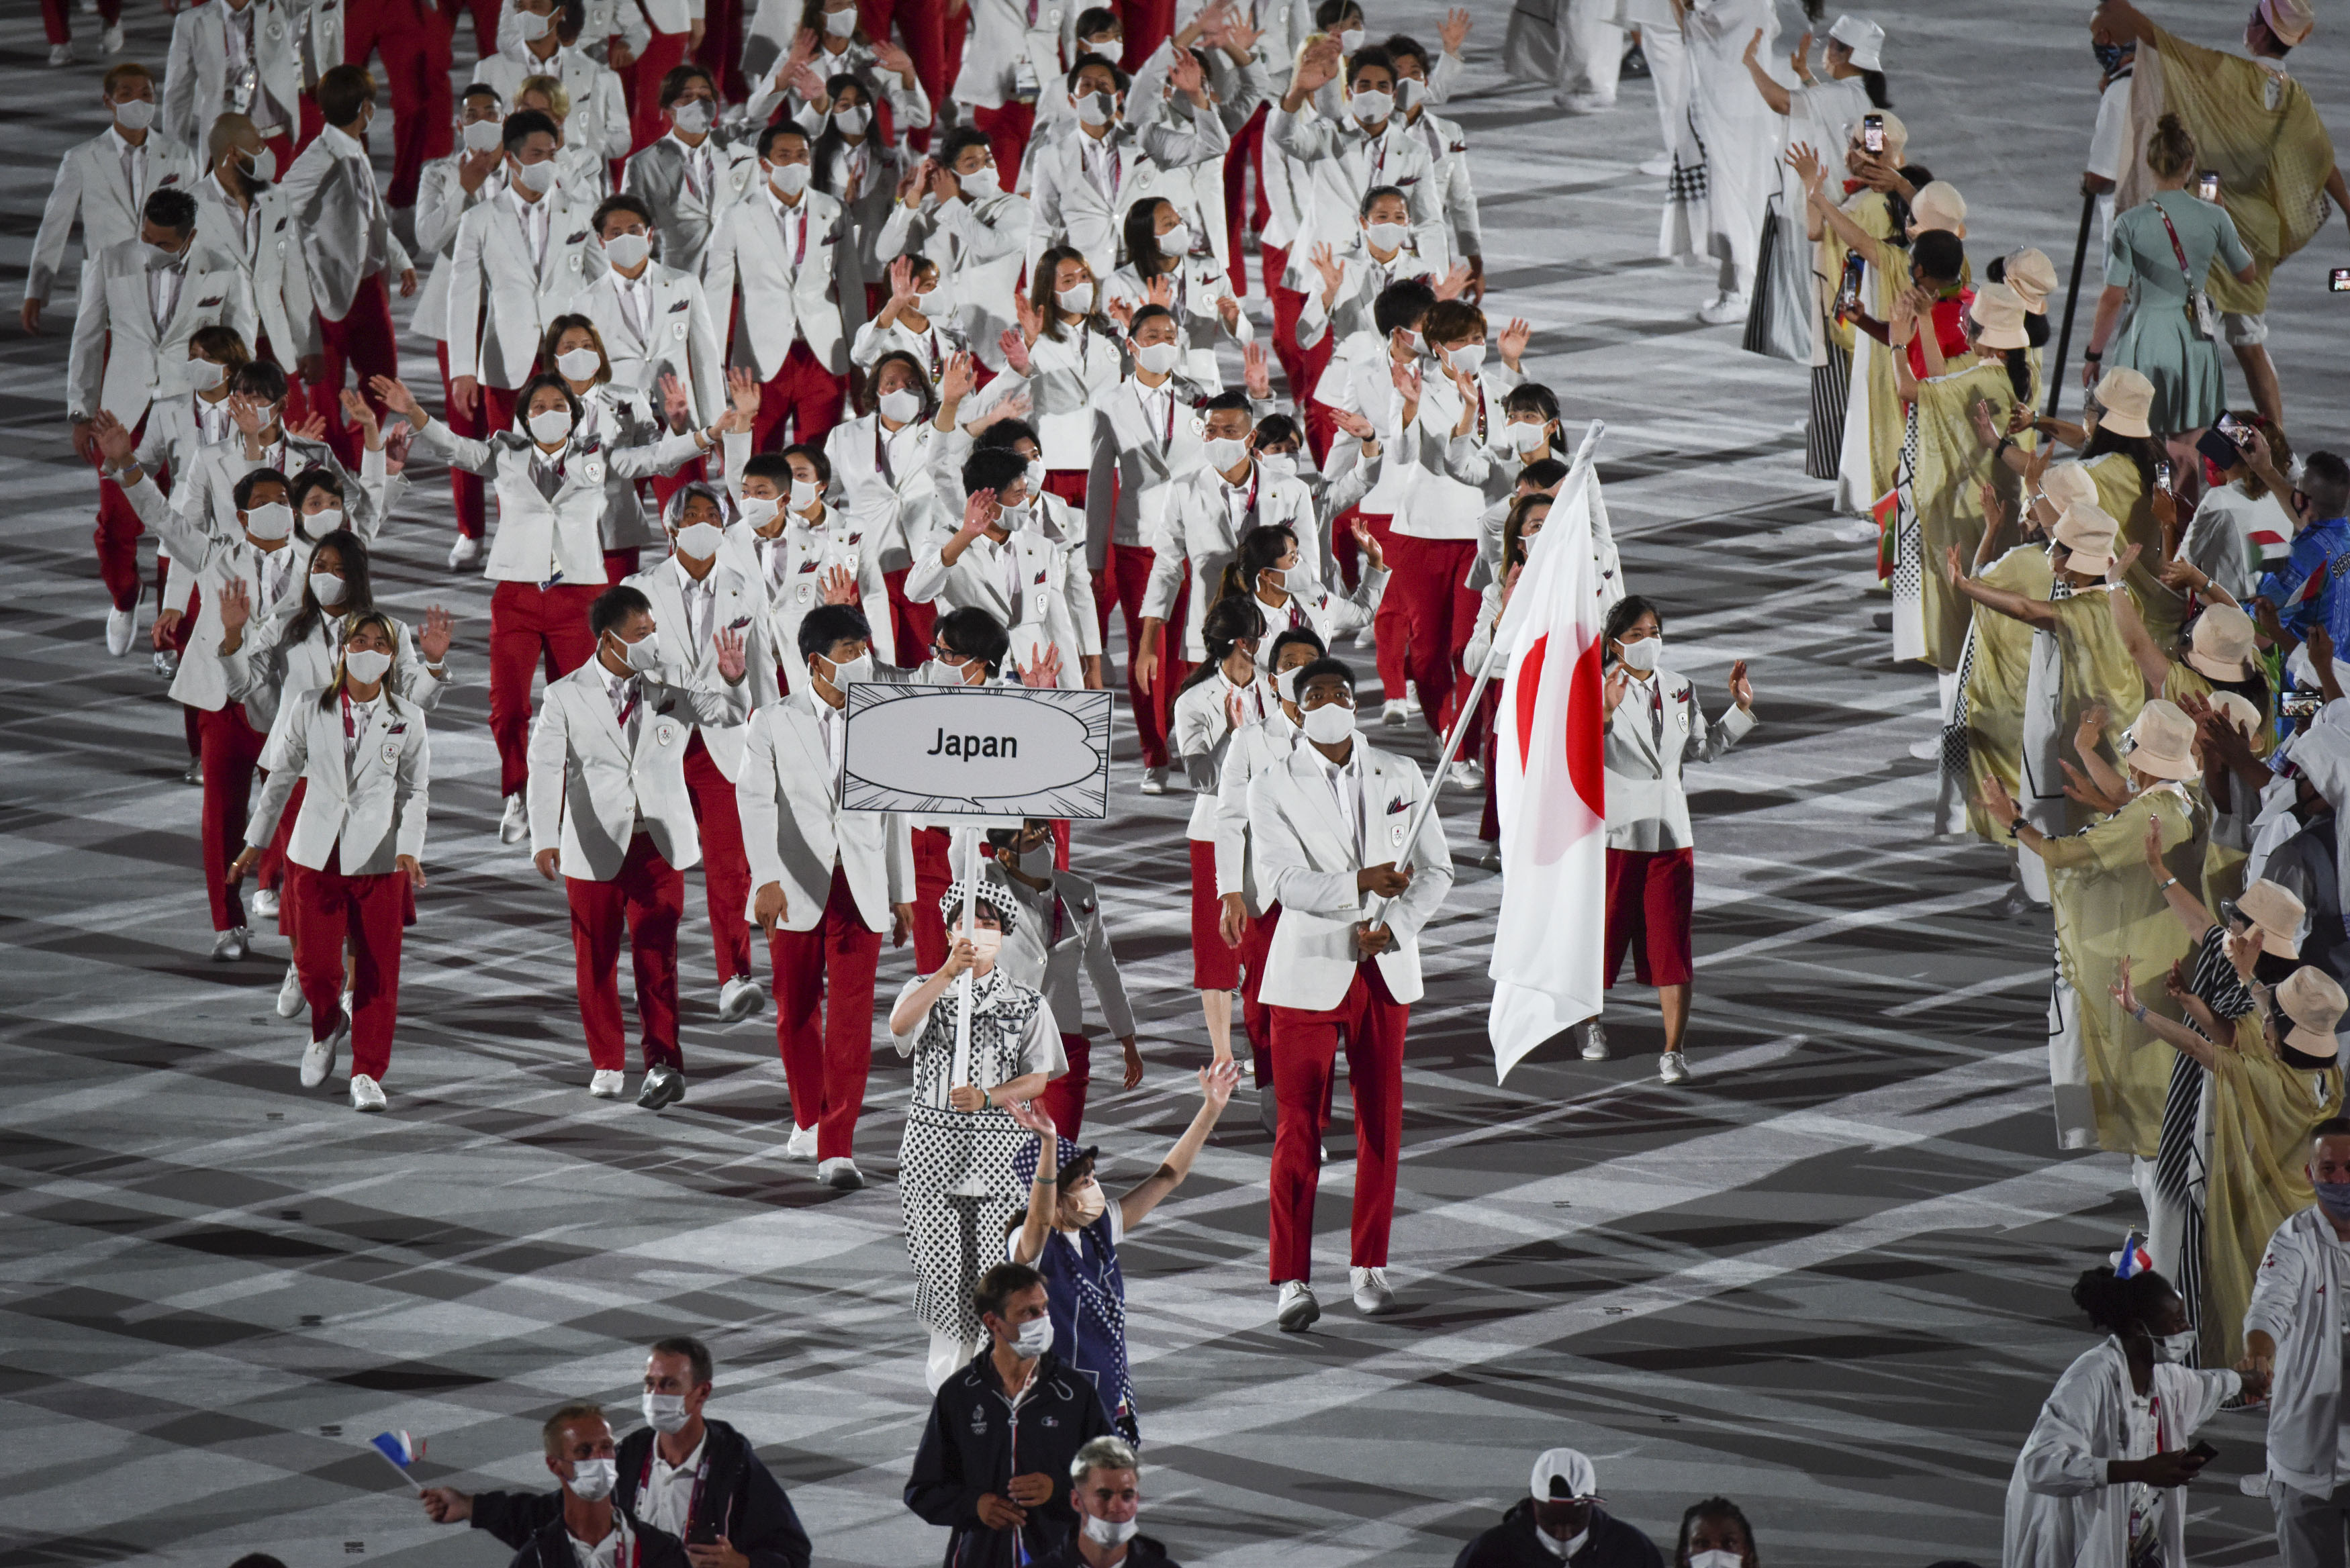 The Olympics Roll Call Raises Questions About the Identity of Nations